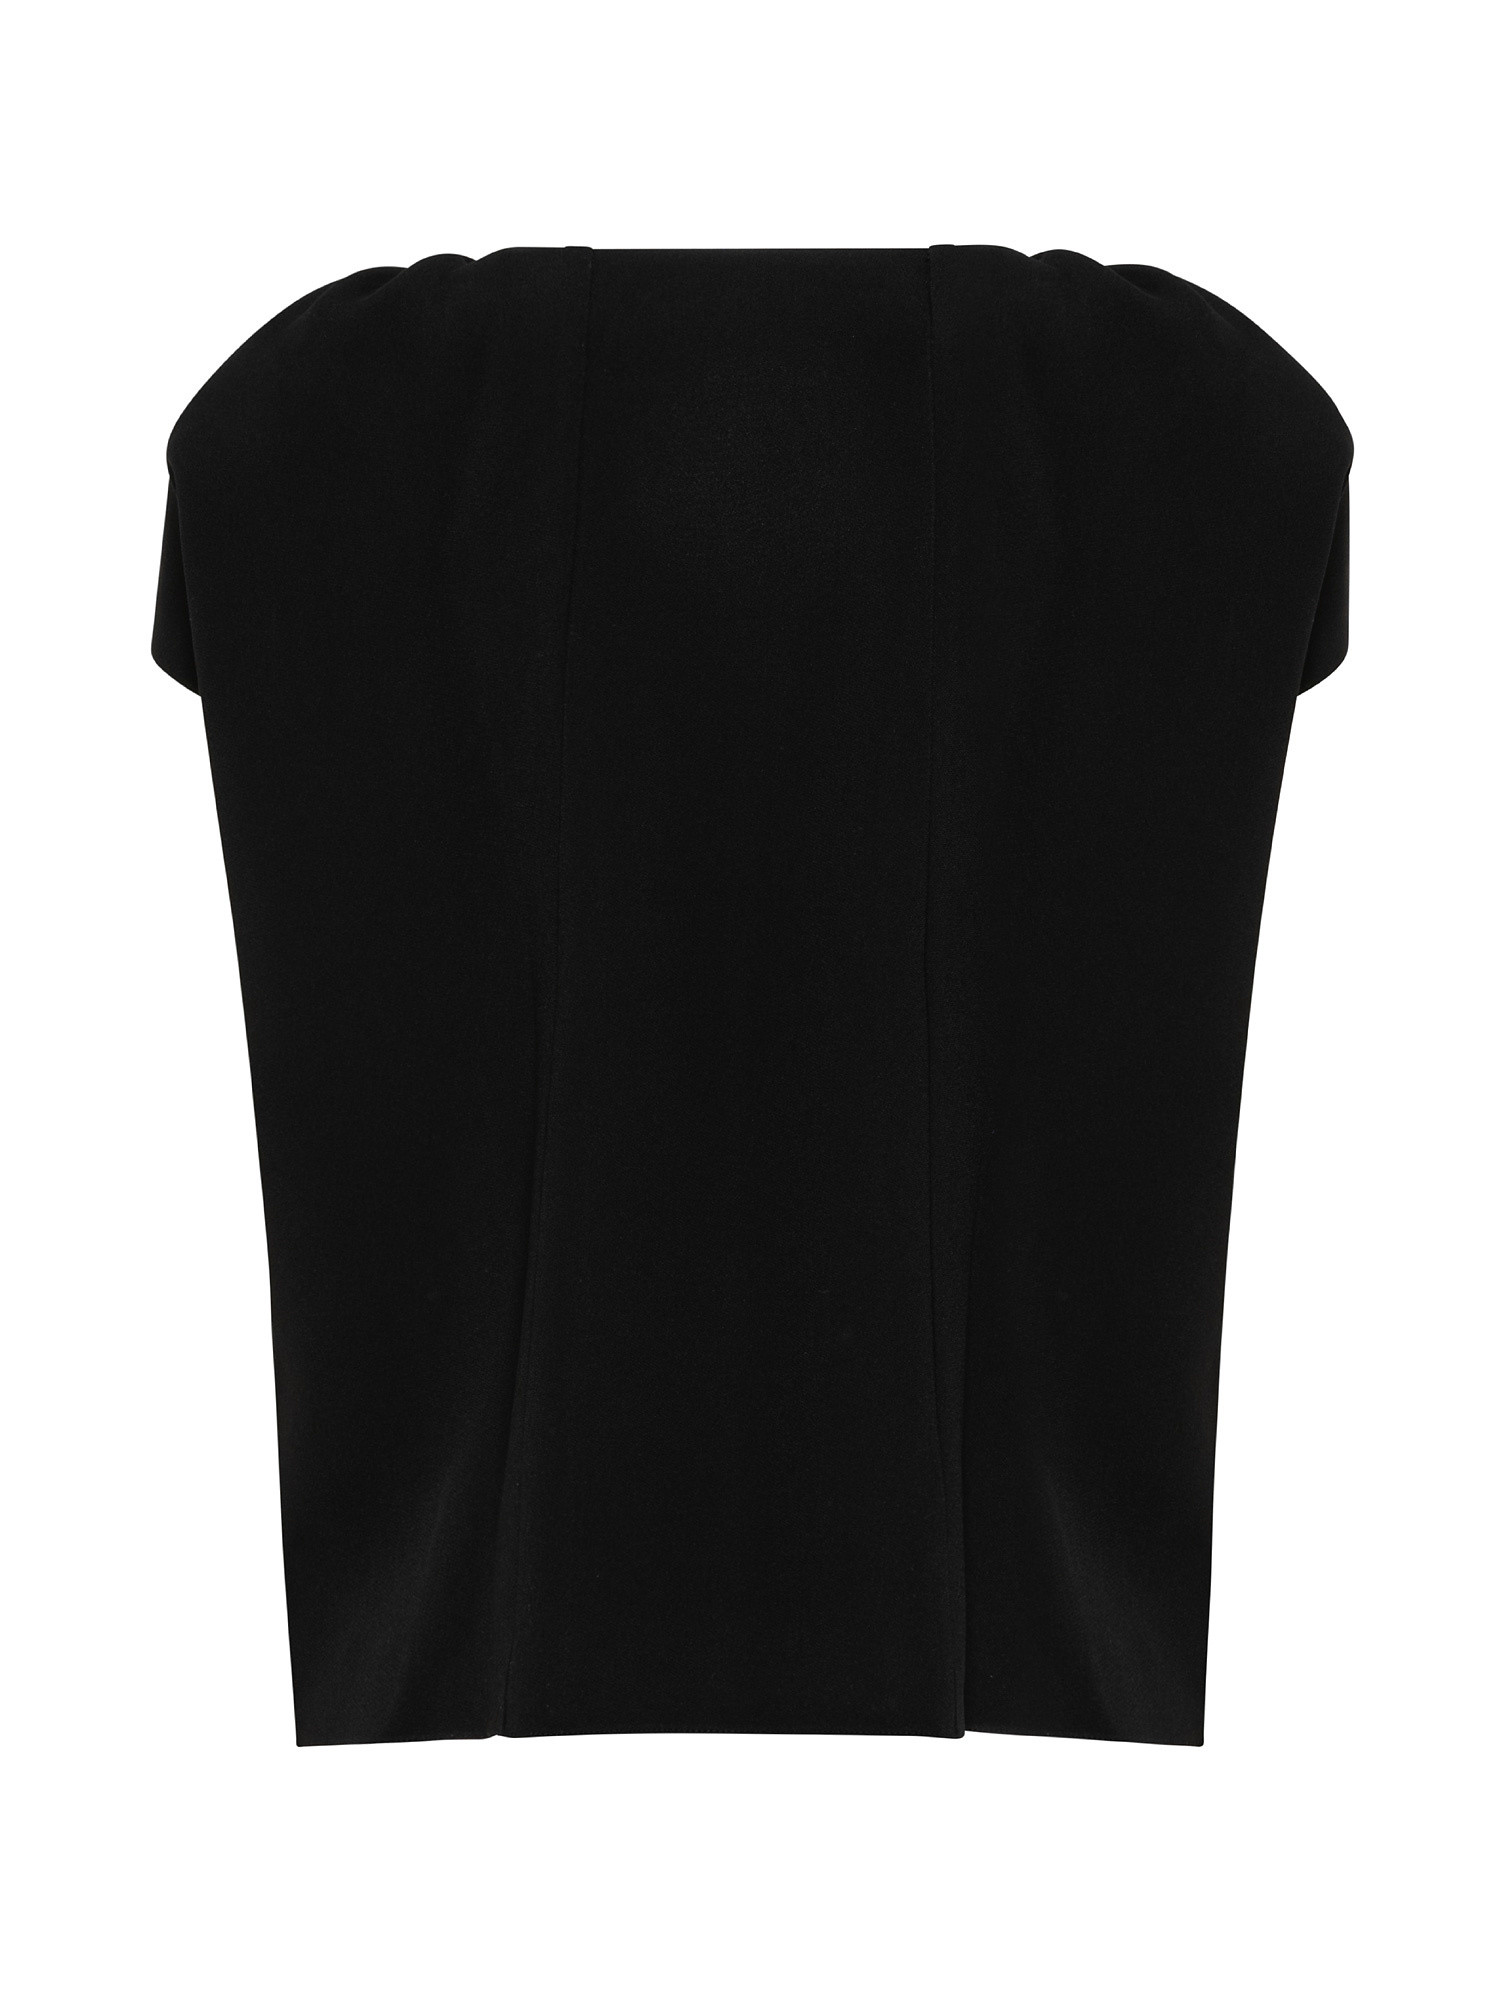 Top with ruffle sleeves, Black, large image number 1